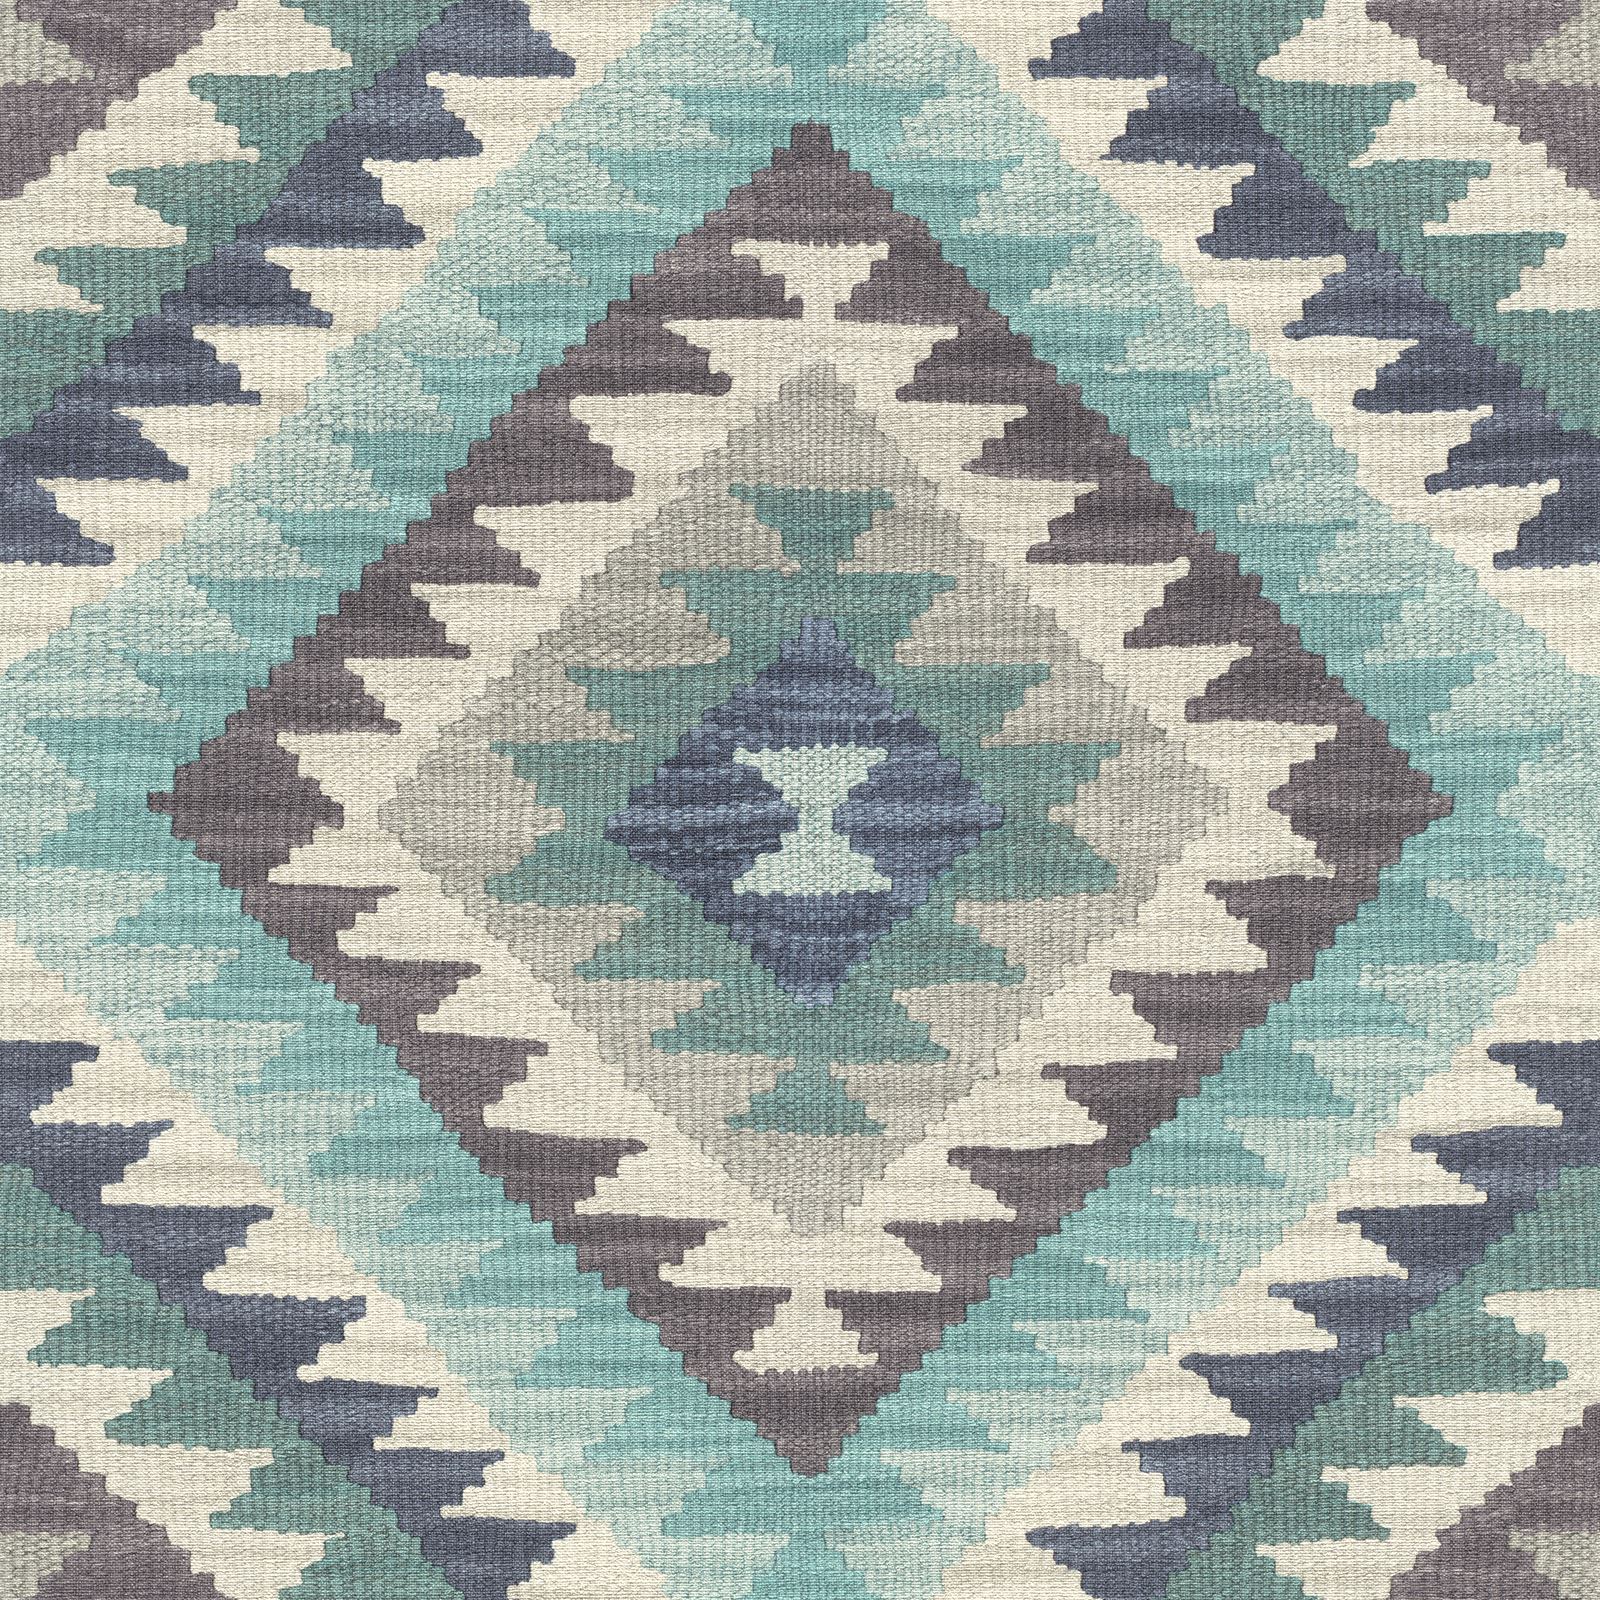 Geometric Wallpaper Rose Gold Silver Navy Blue Teal - Teal And Gold Aztec - HD Wallpaper 